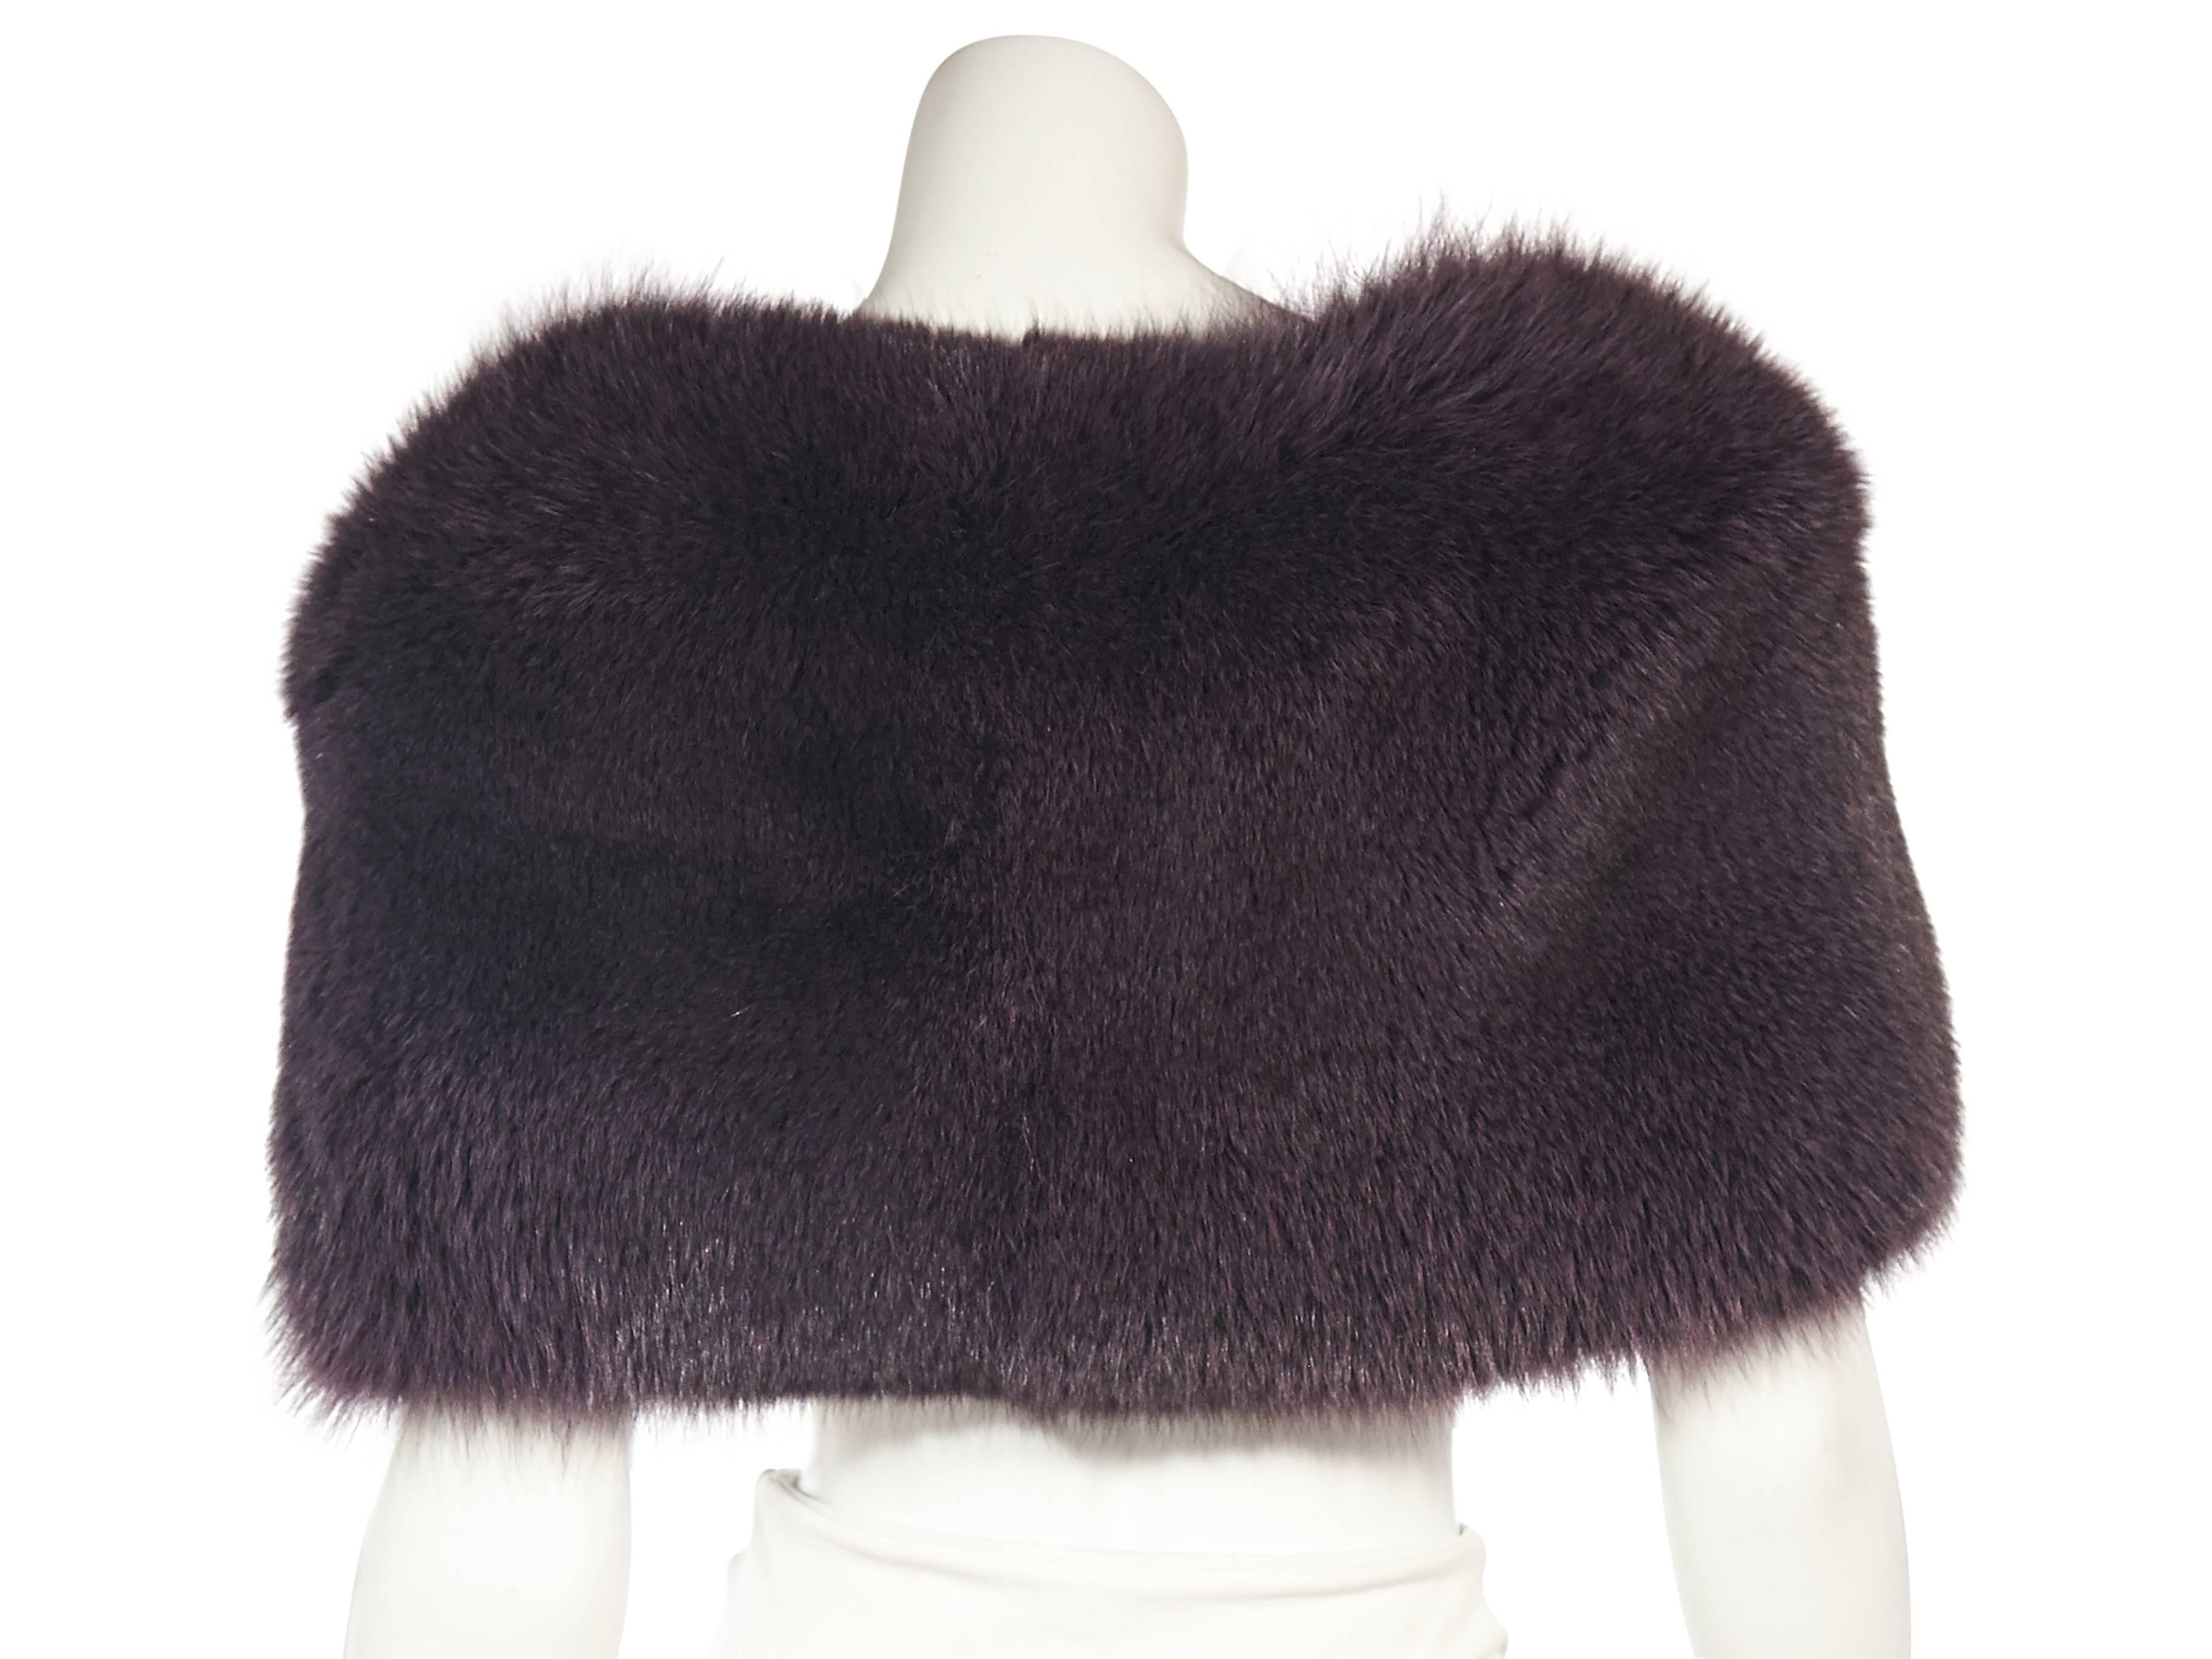 Product details:  Purple fur shrug by Heidi Weisel.  Concealed closure. 
Condition: Excellent. 